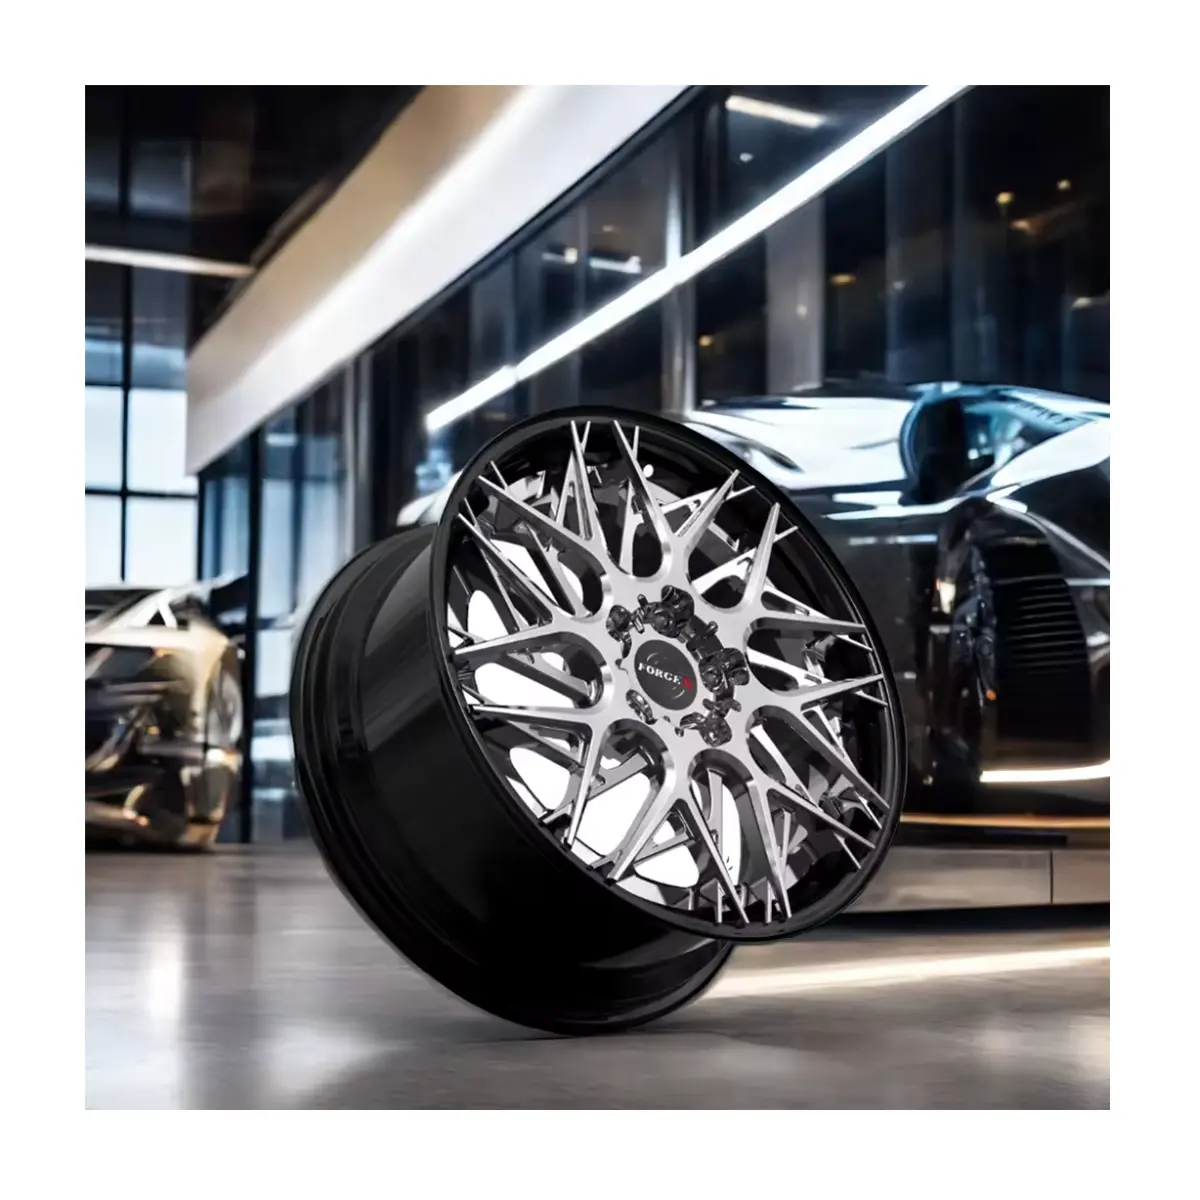 Customizable 2-Piece Forged Alloy Wheels in 18-24 Inch Sizes 112/120mm PCD 50/30/0mm ET for Cars with Car Rims"